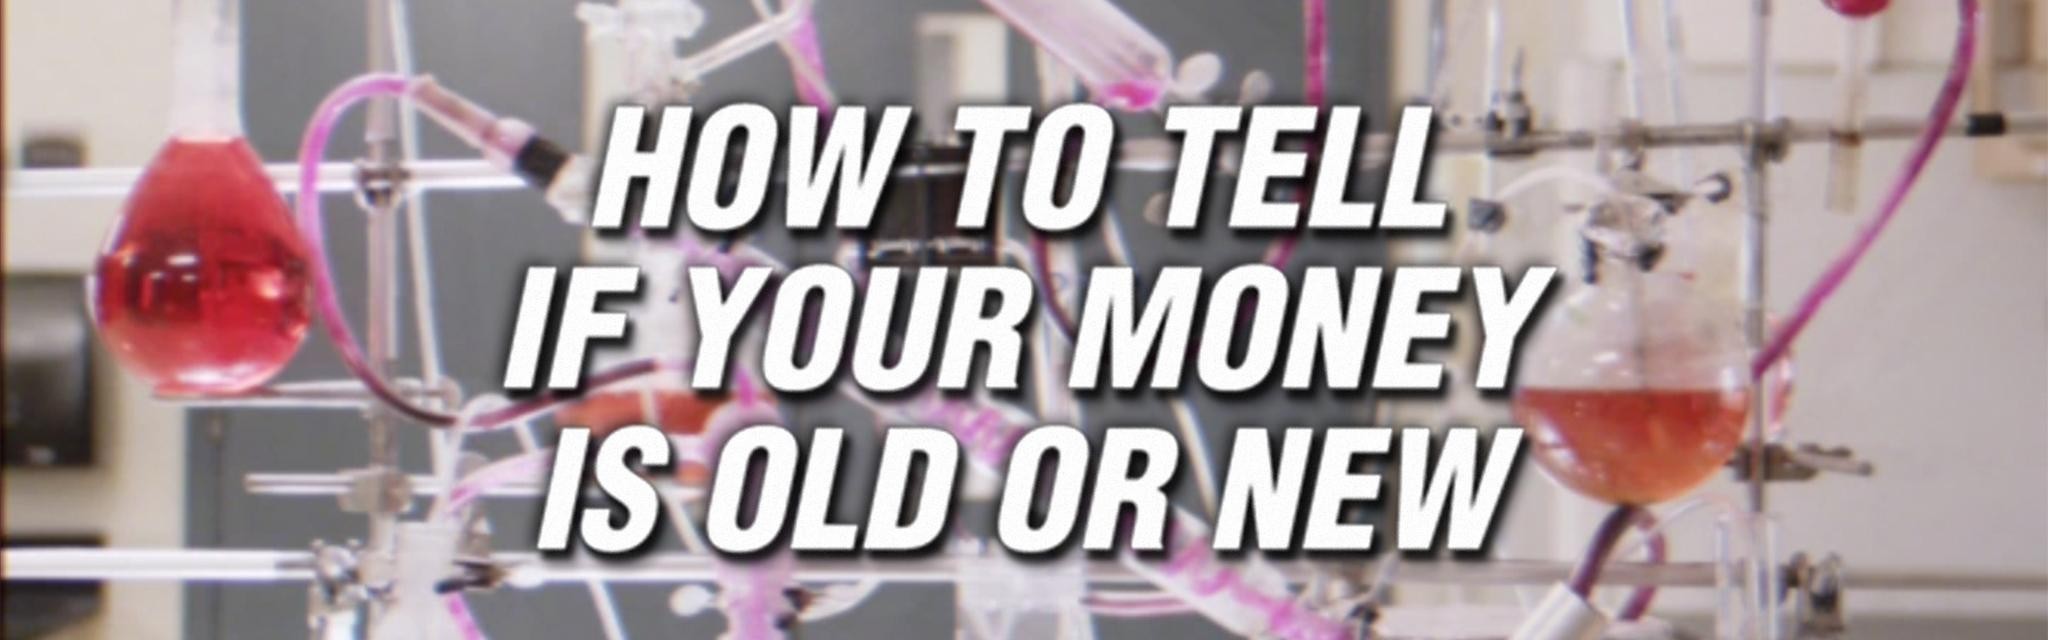 How To Tell If Your Money Is Old Or New